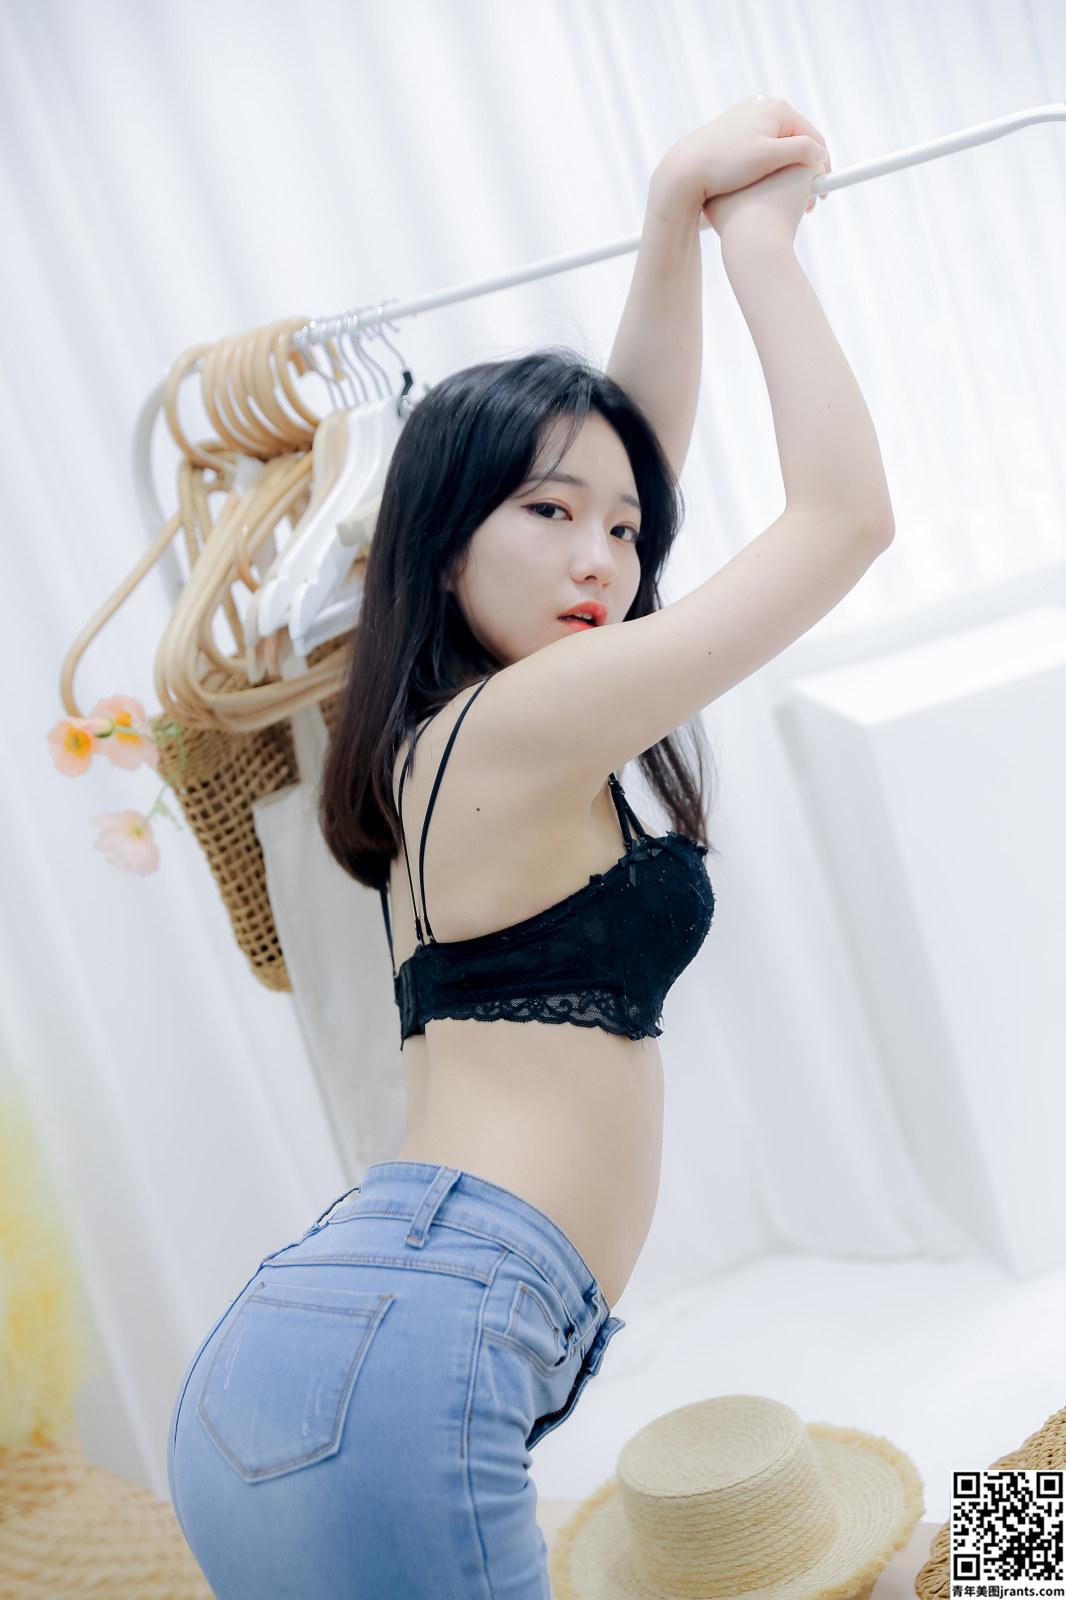 [JOApictures] &#8211; Sehee &#8211; JOA 21. MARCH VOL. 1